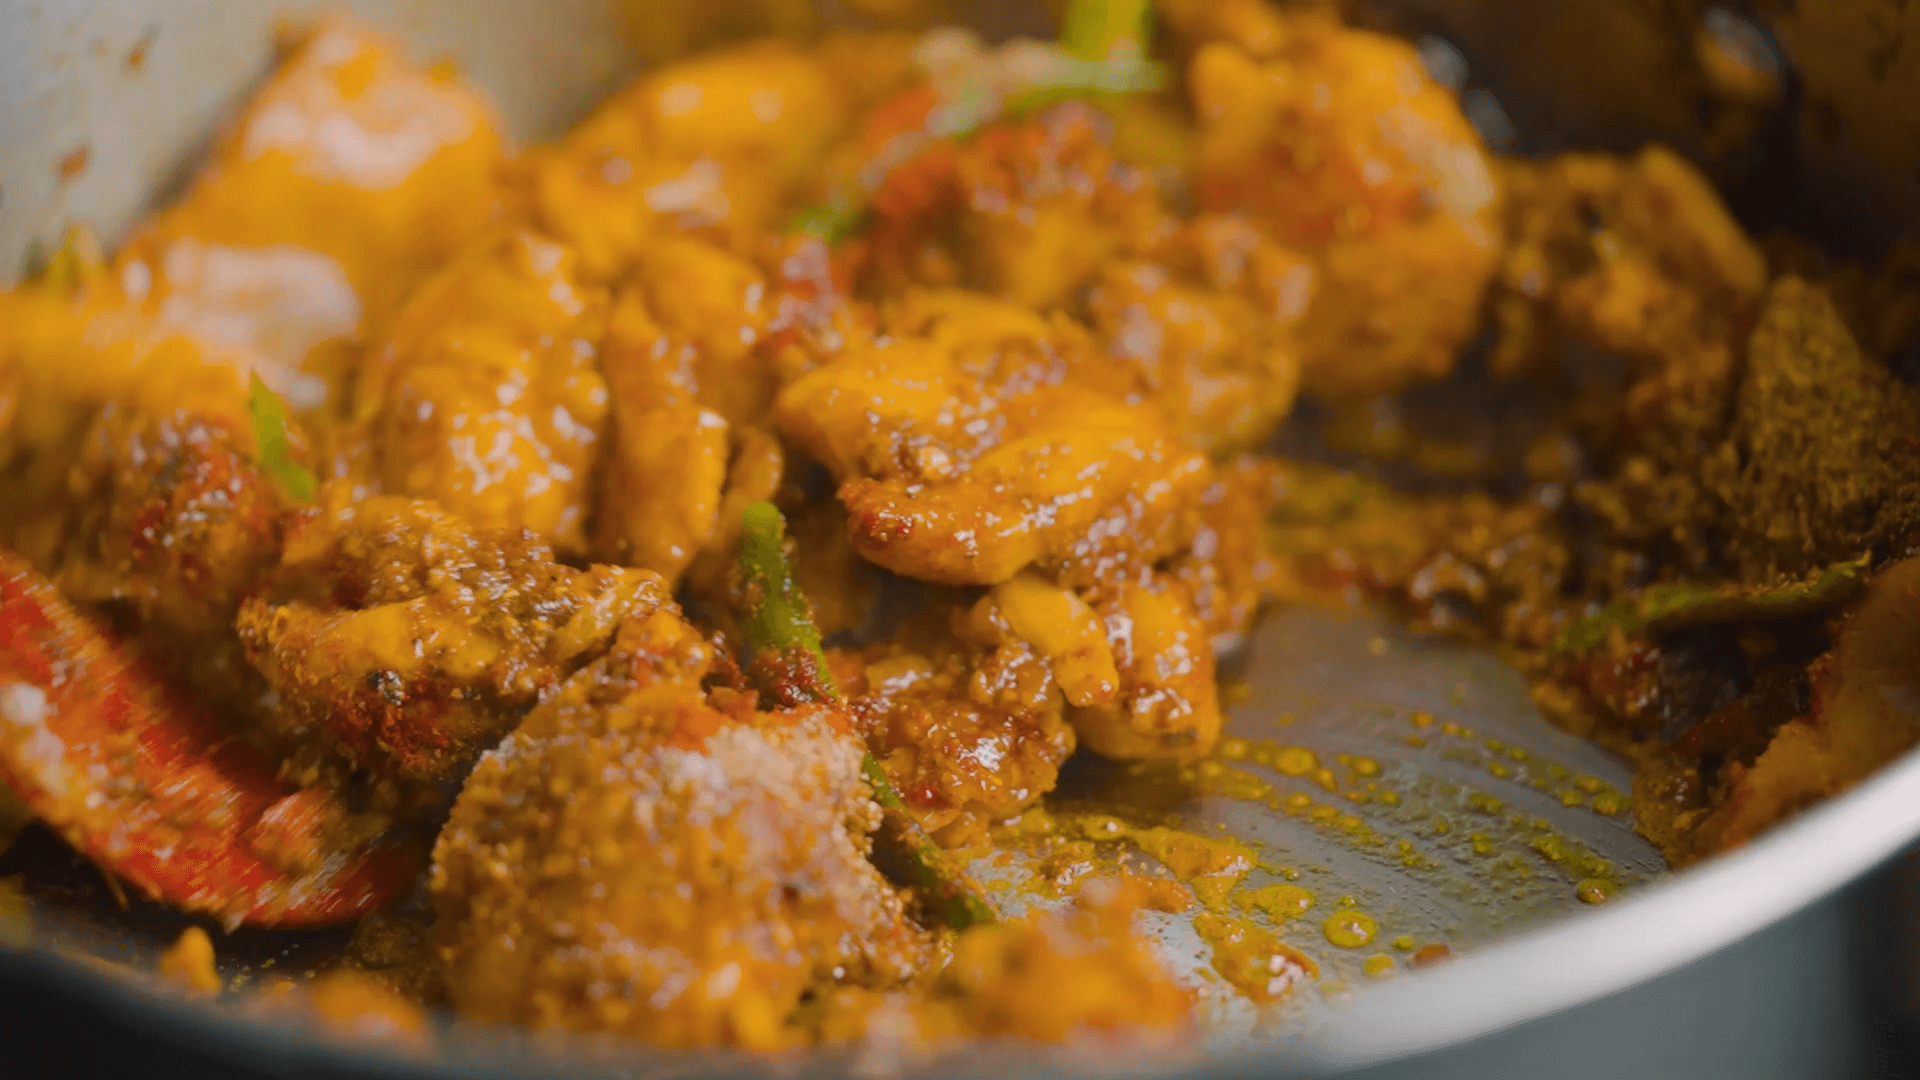 Dhaba style Chicken Curry